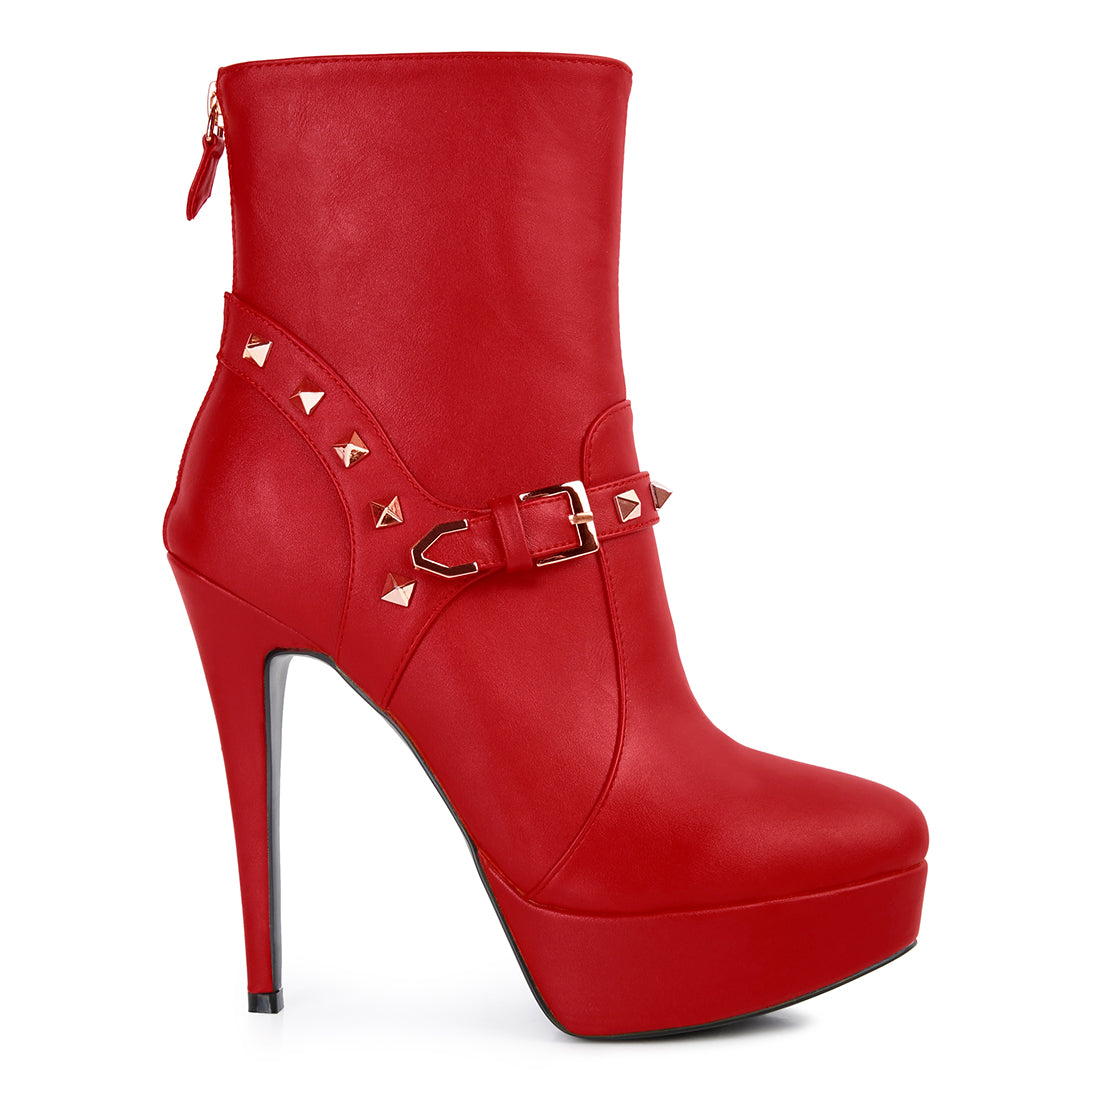 Red Metal Stud Ankle Boot